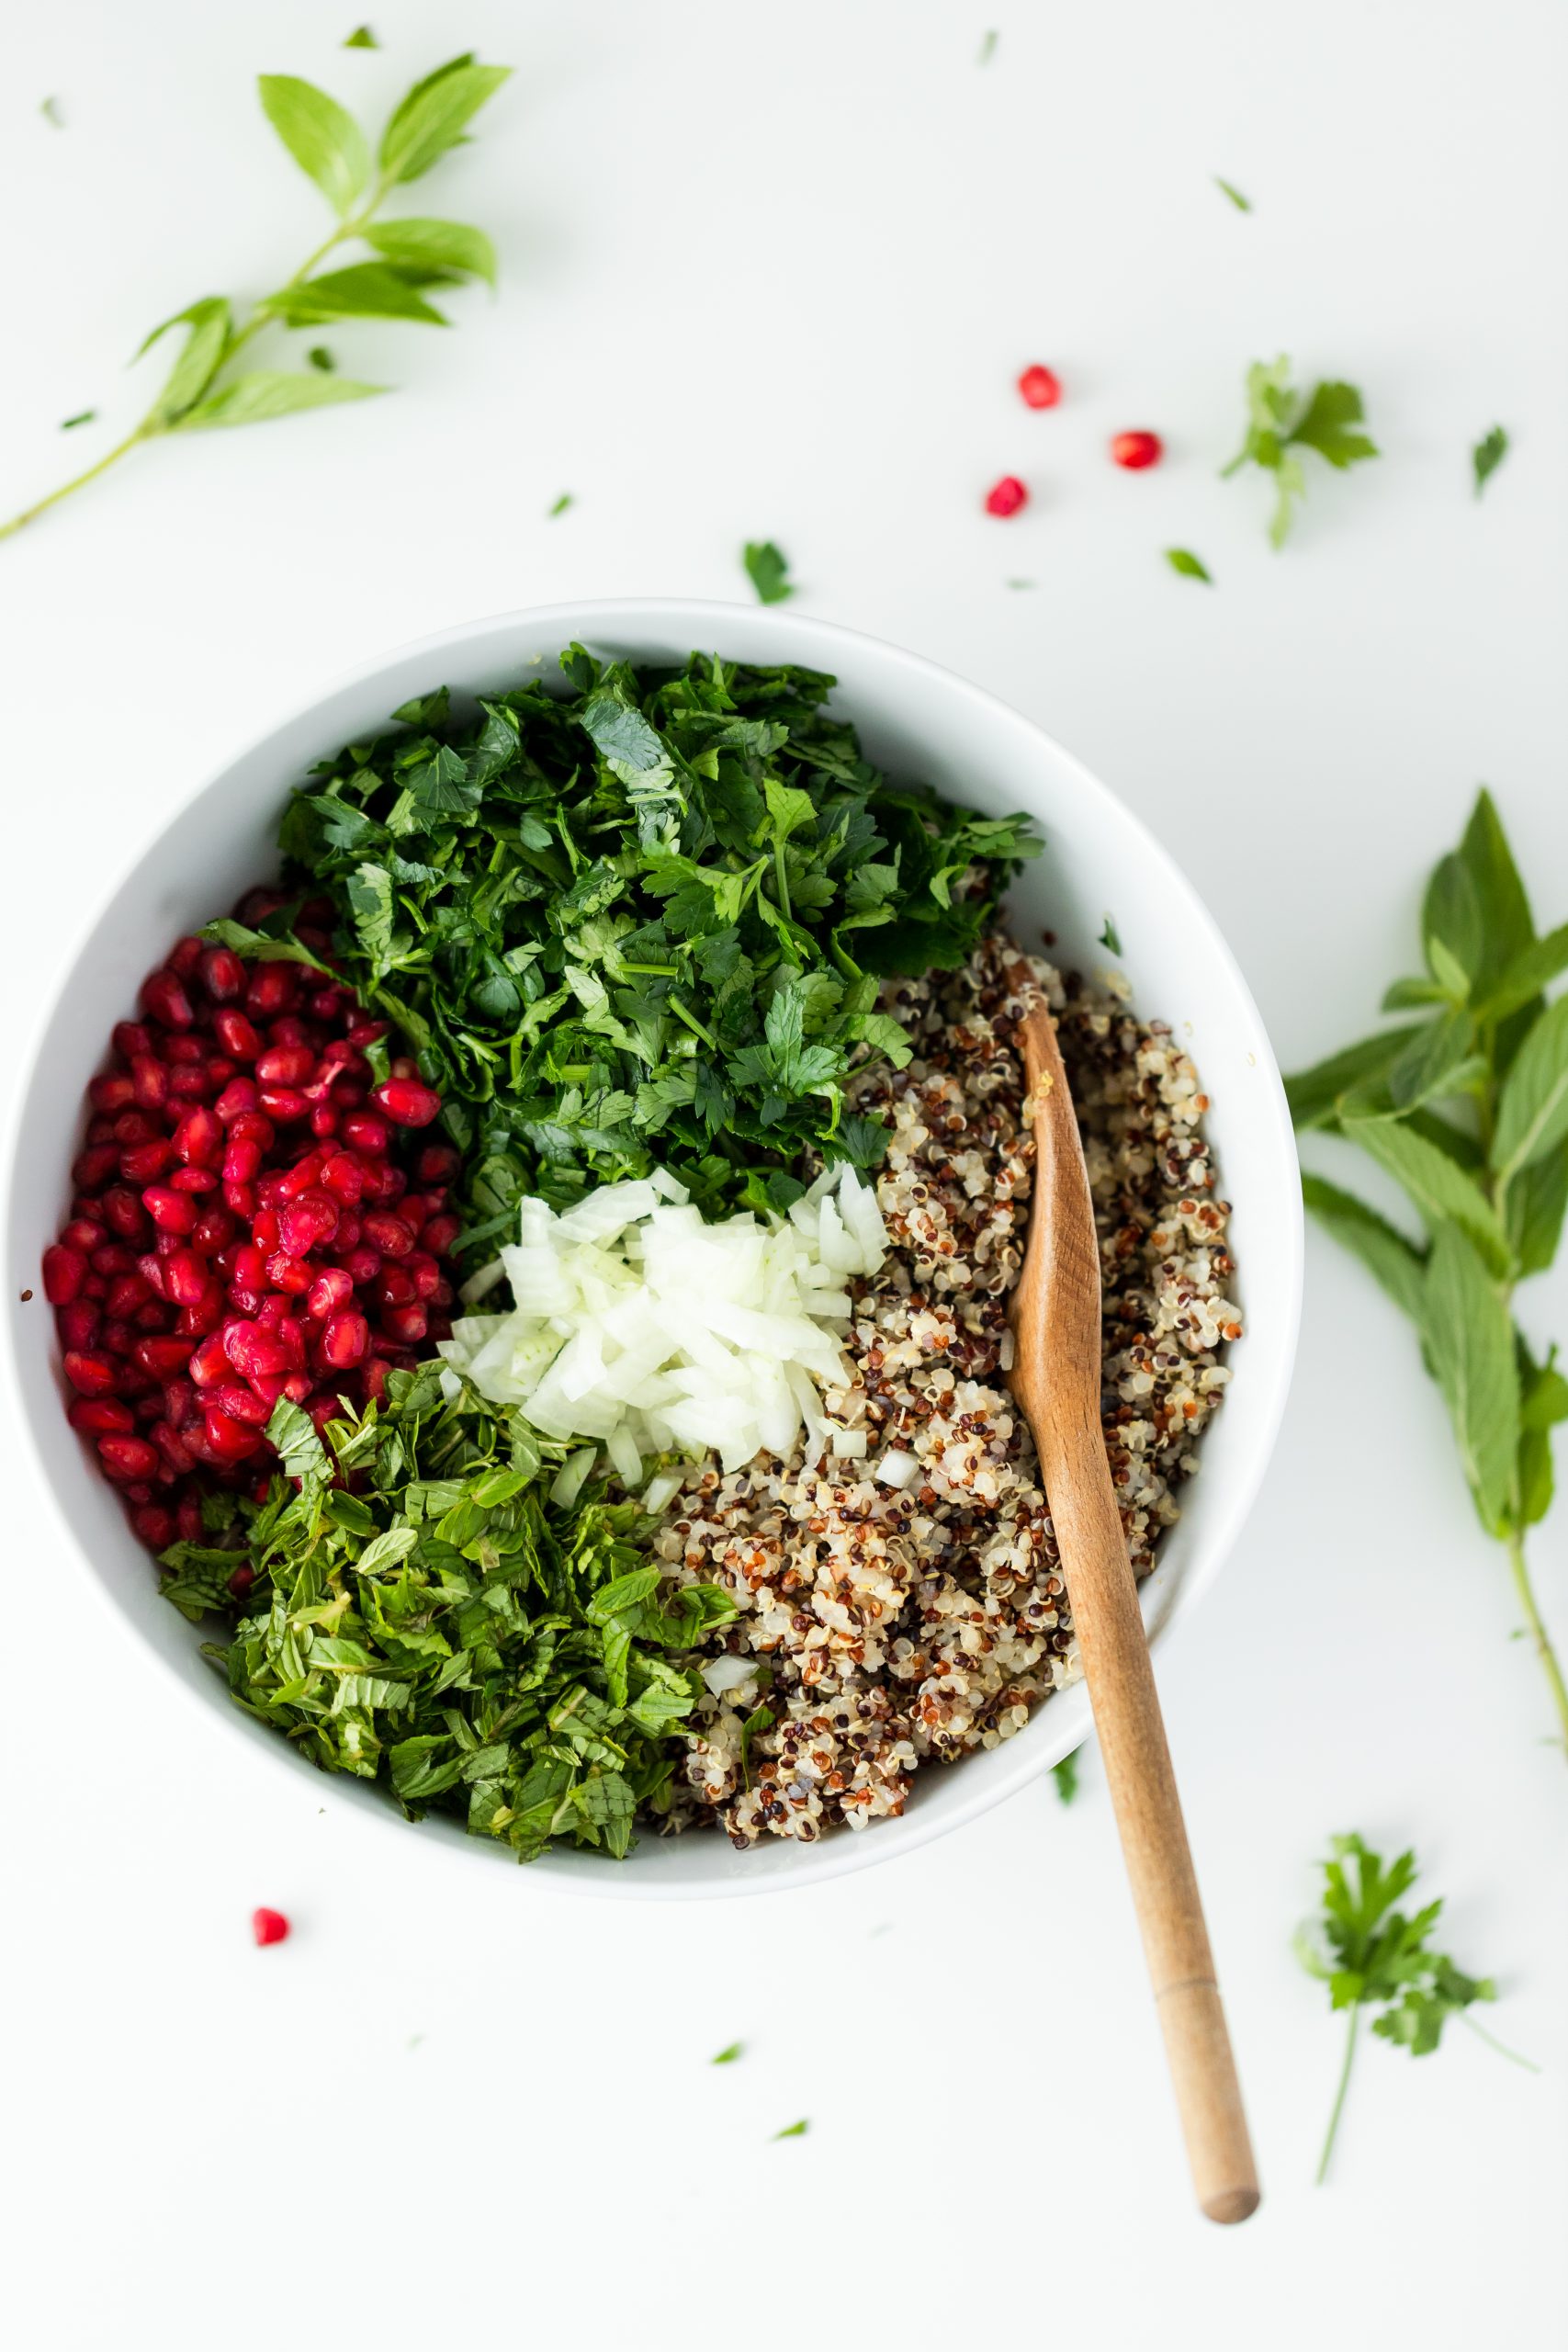 Quinoa Salad with Parsley and Pomegranate Seeds